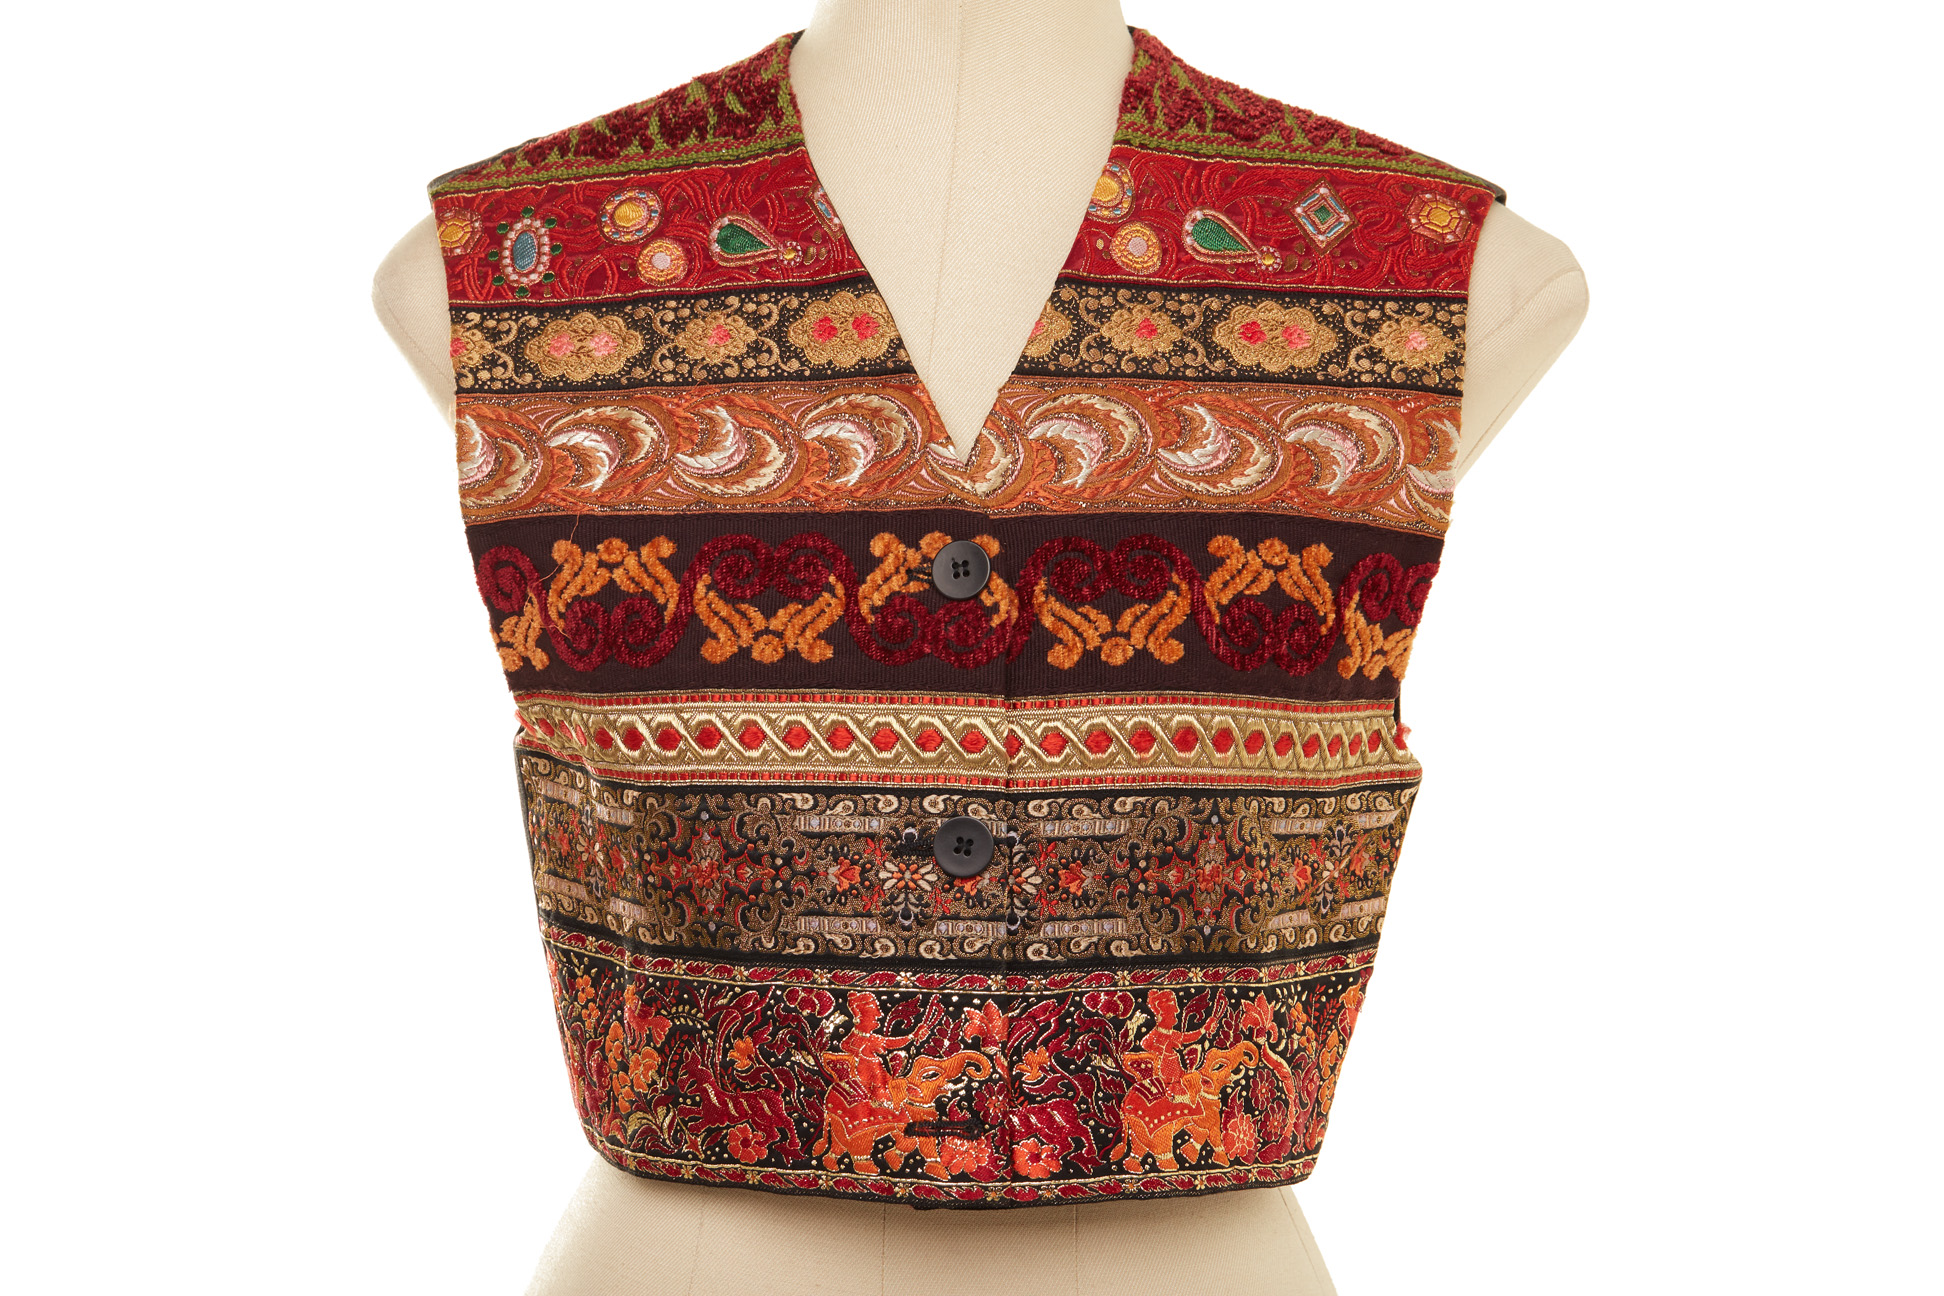 THREE ROMEO GIGLI CALLAGHAN BROWN EMBROIDERED WAISTCOATS - Image 6 of 8